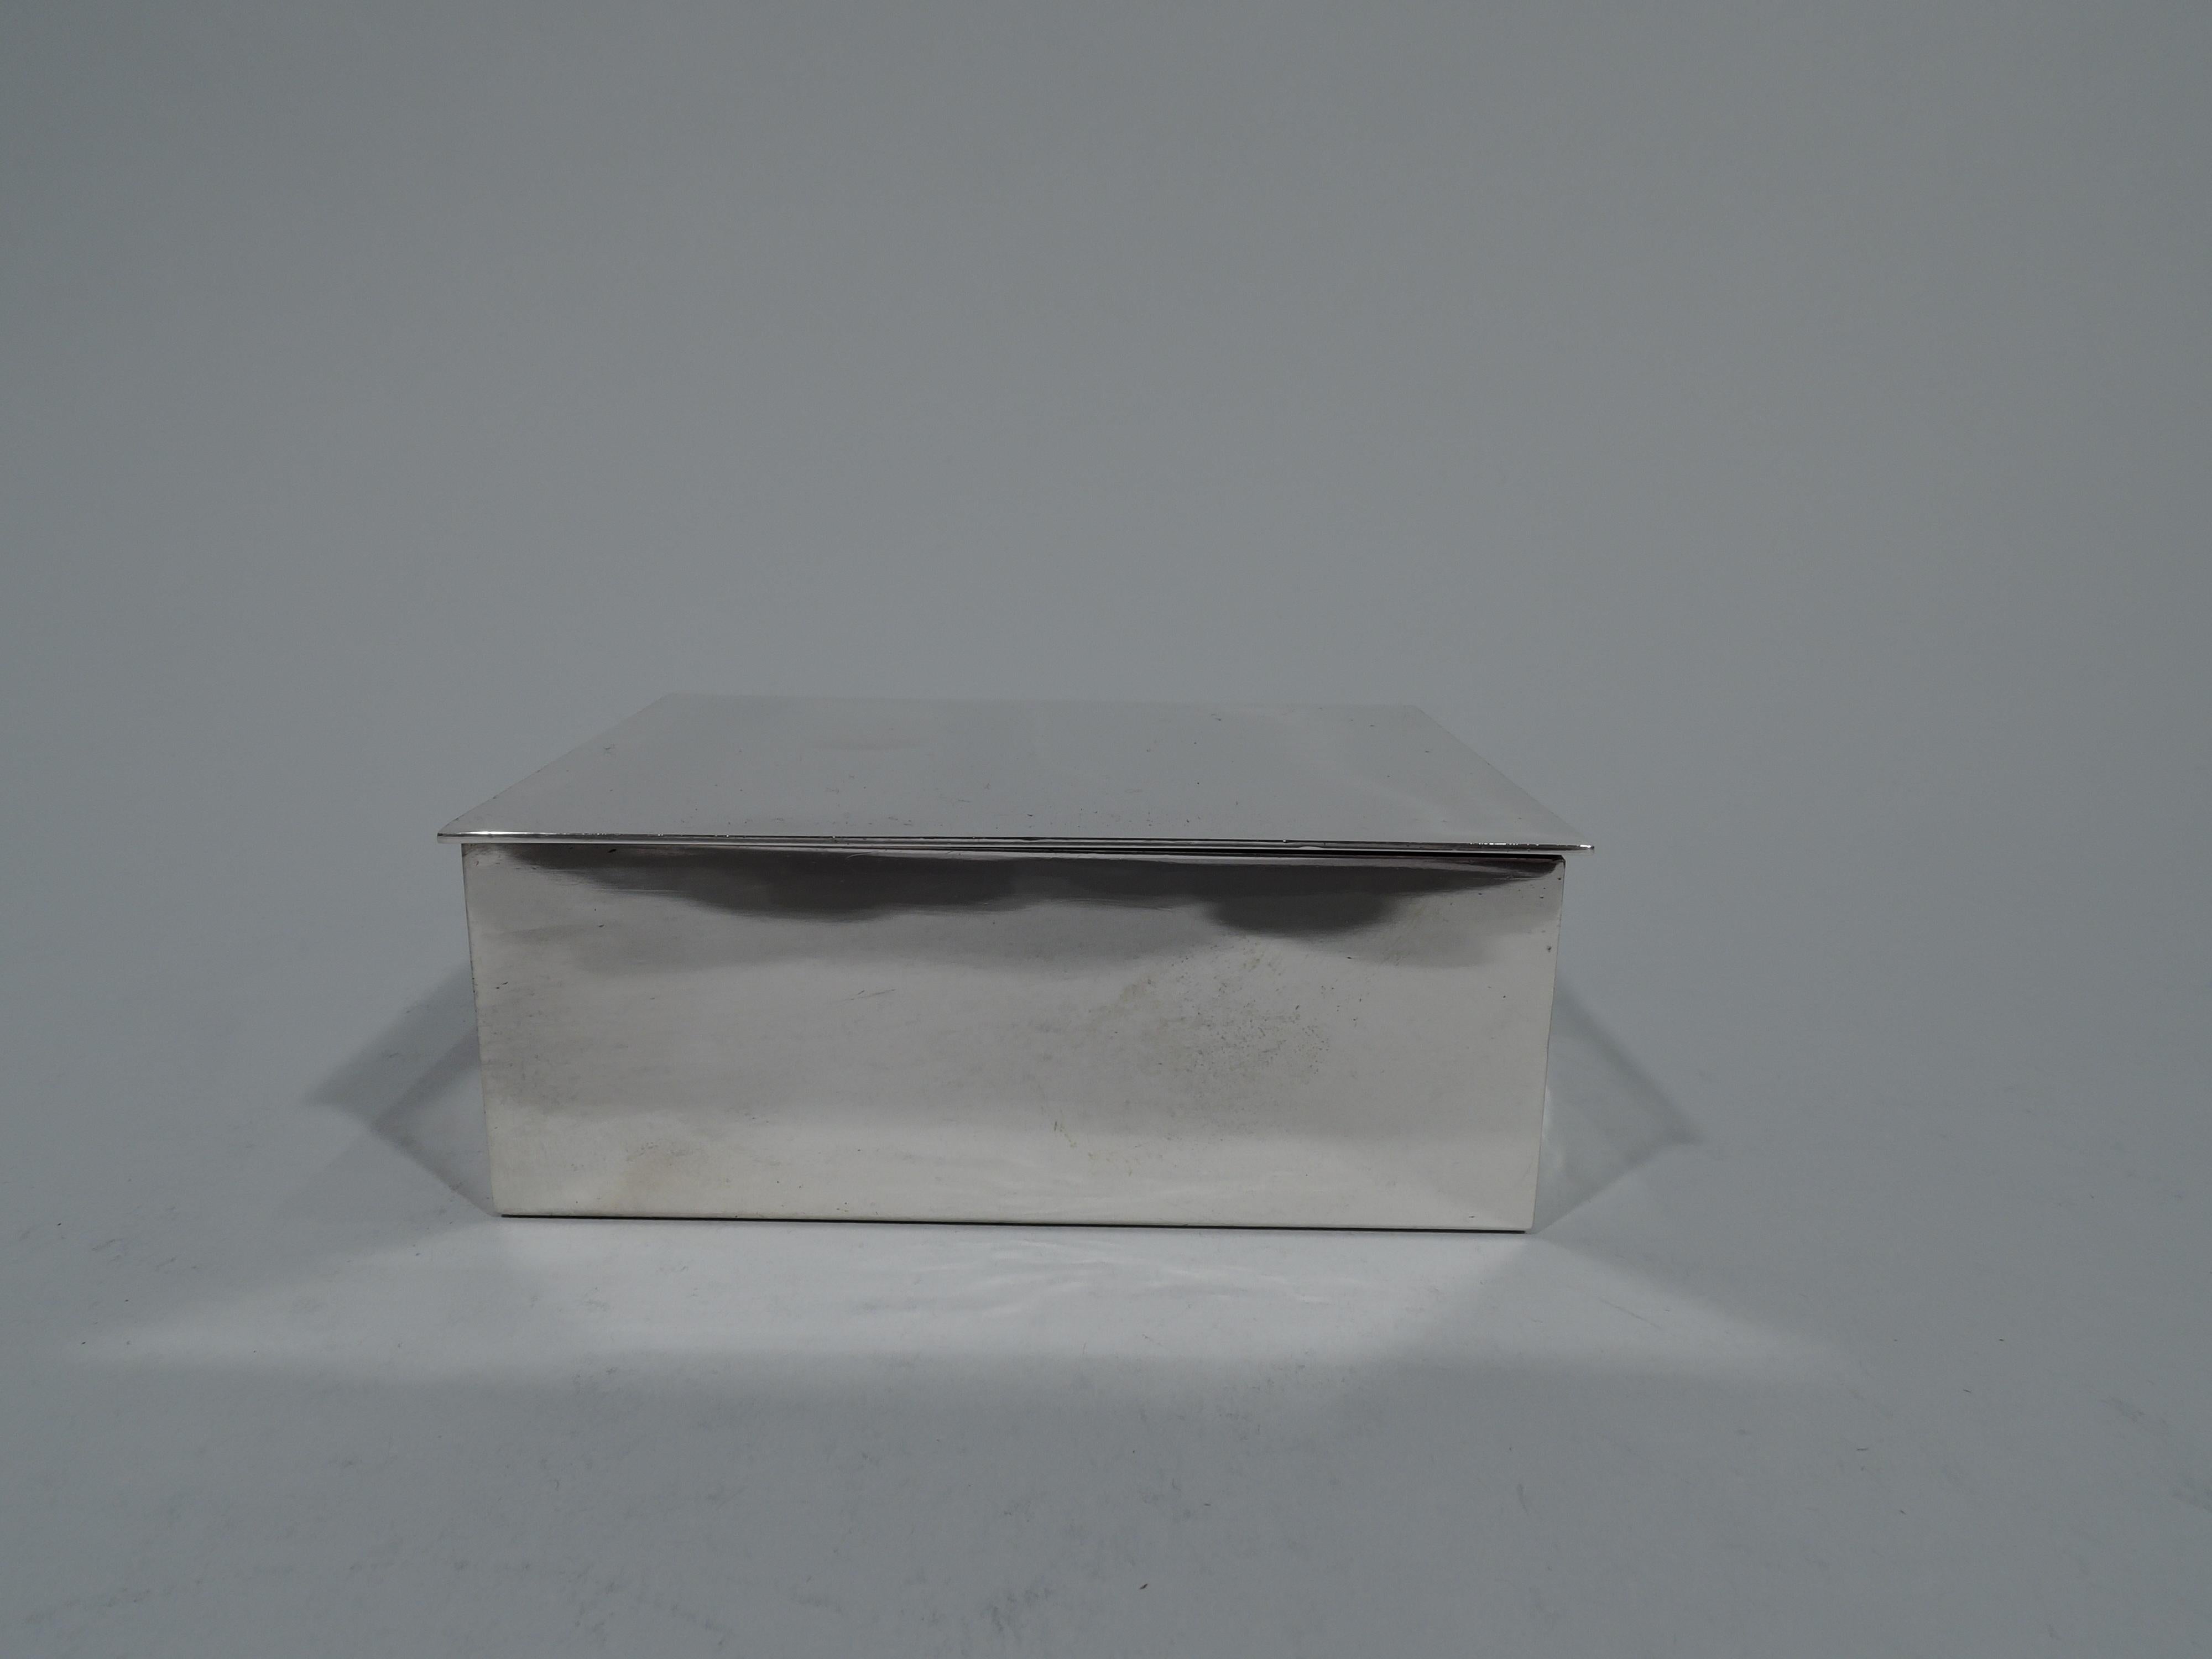 Modern and compact sterling silver box. Made by Tiffany & Co. in New York. Rectangular with flat, hinged, and overhanging cover. Box interior cedar lined. Hallmark includes postwar pattern no. 23325 and director’s letter L (1956-circa 1965). Gross